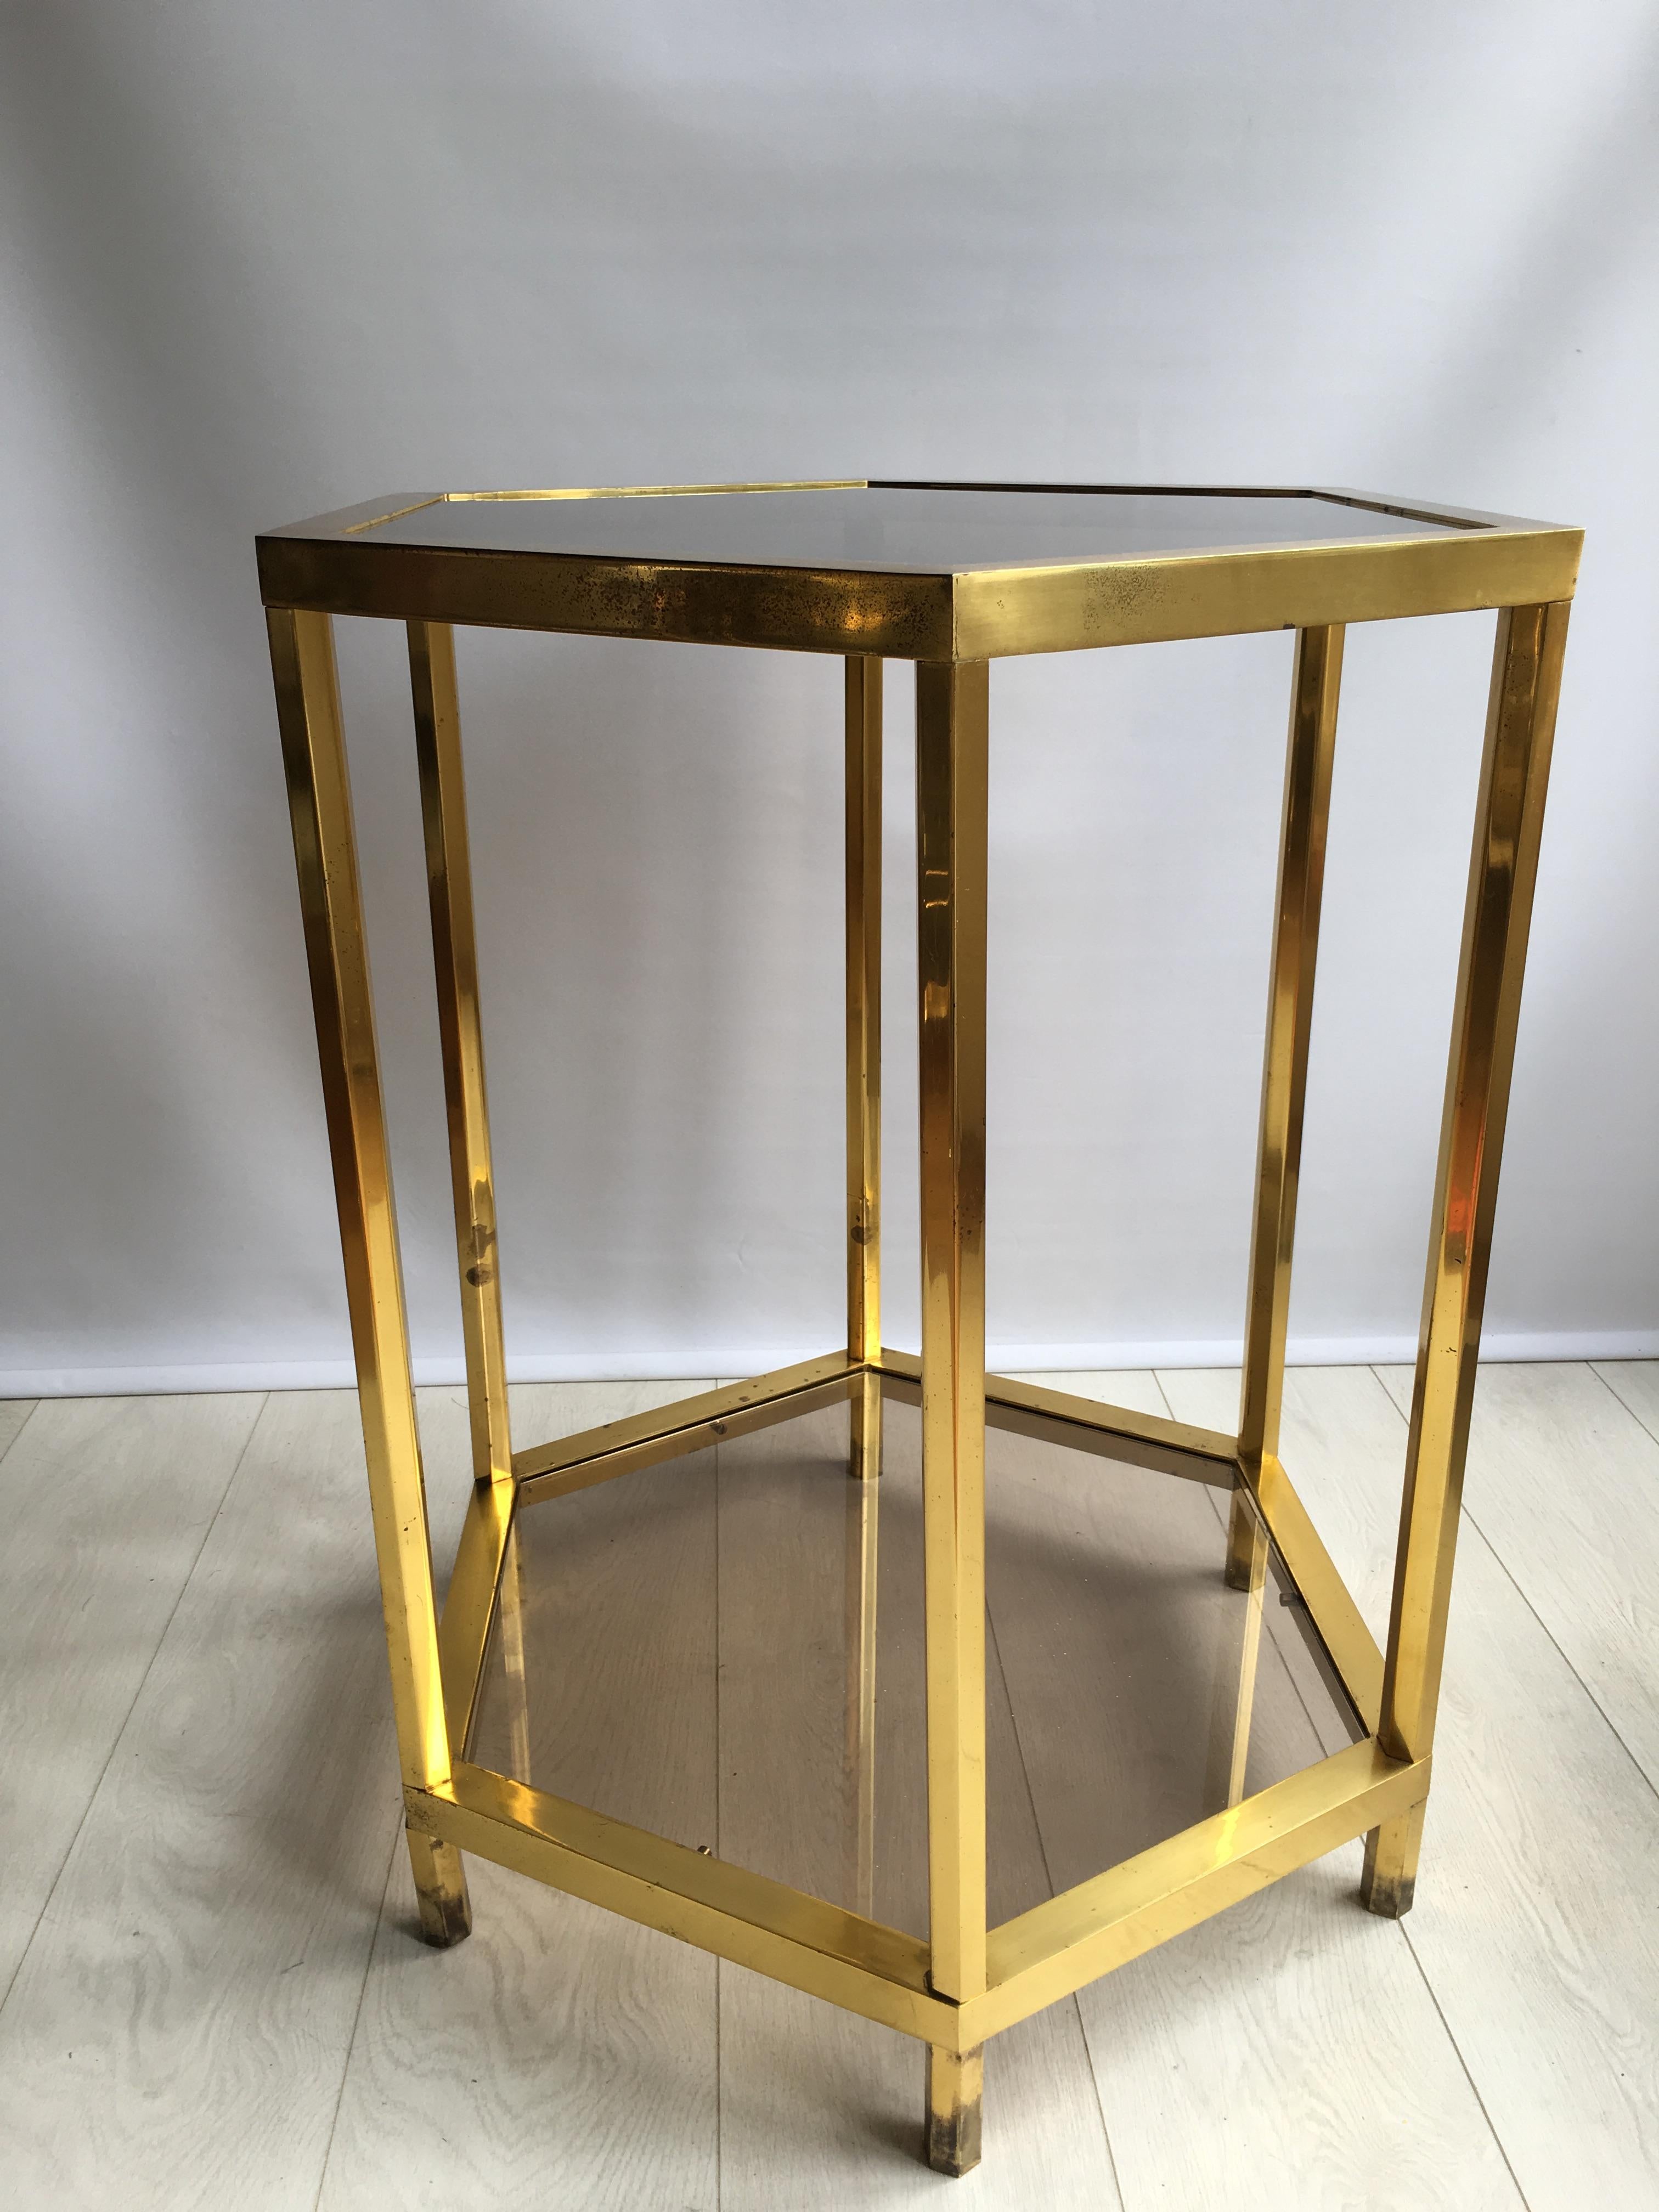 Great shape to this tall centre table measuring 76.5cm.

With smoked glass shelves and patinated brass finish to the frame (please see close up images)